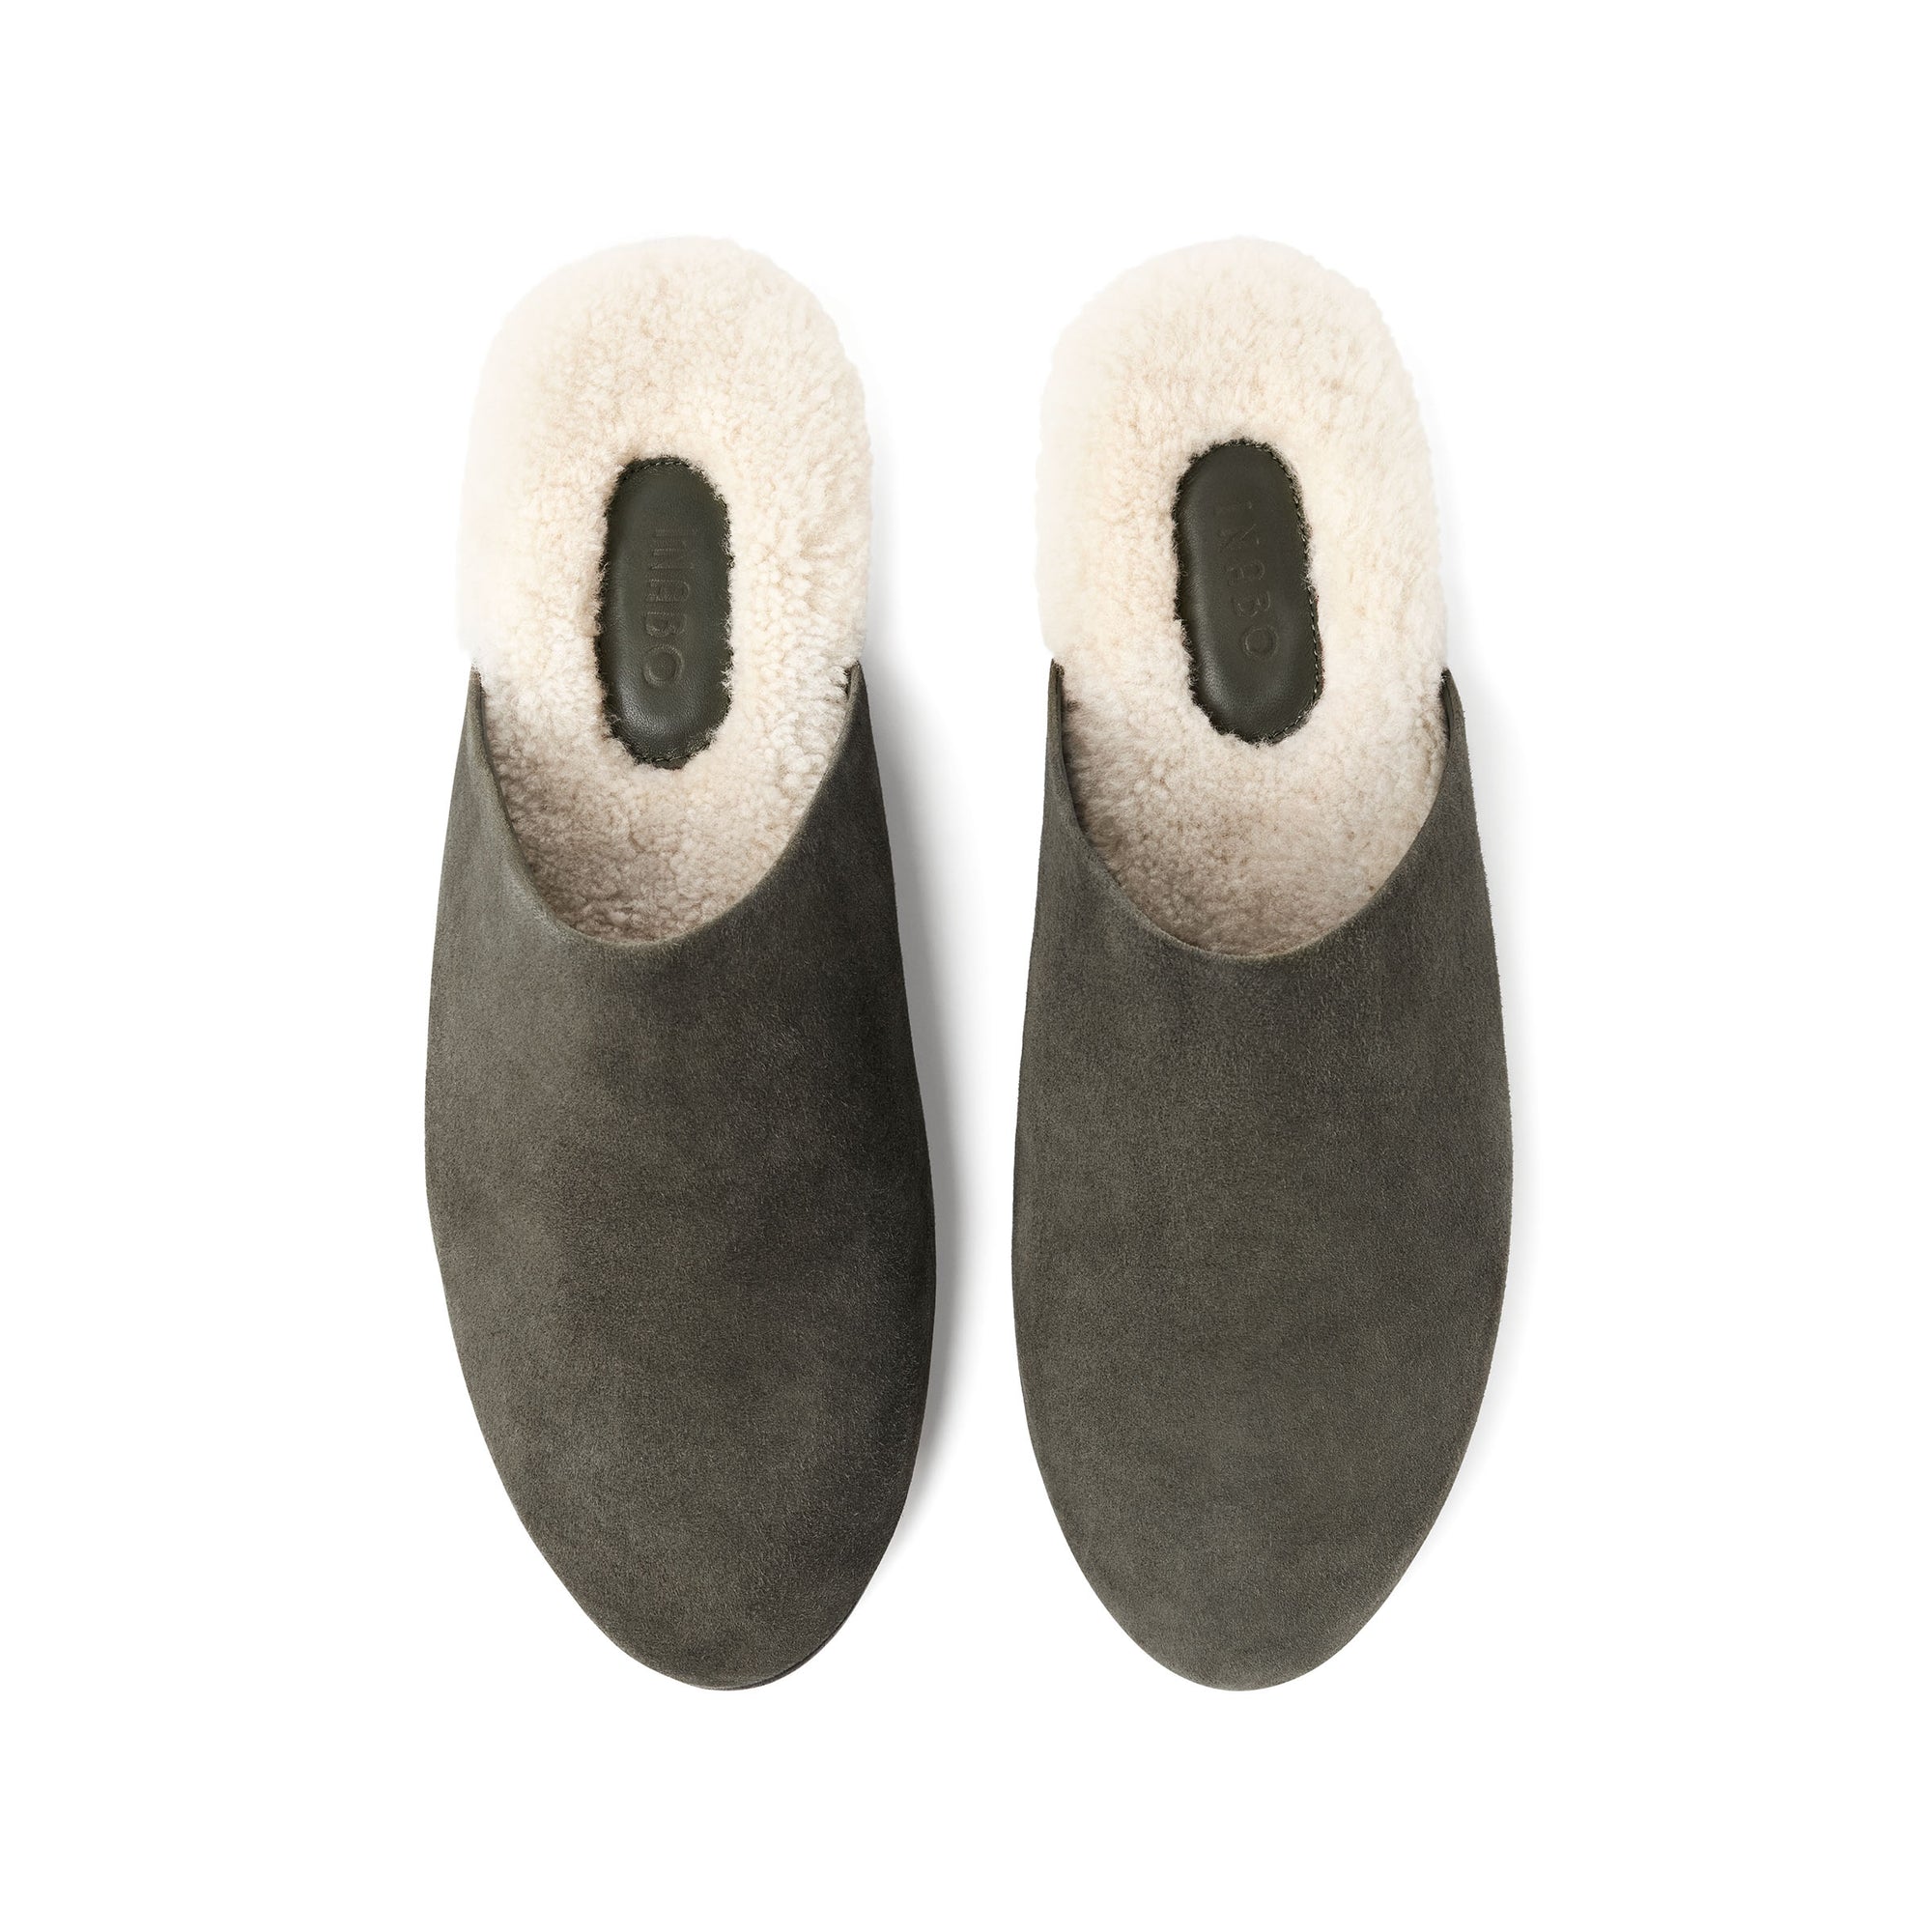 Inabo Men's Slider slipper in army suede and white shearling from above